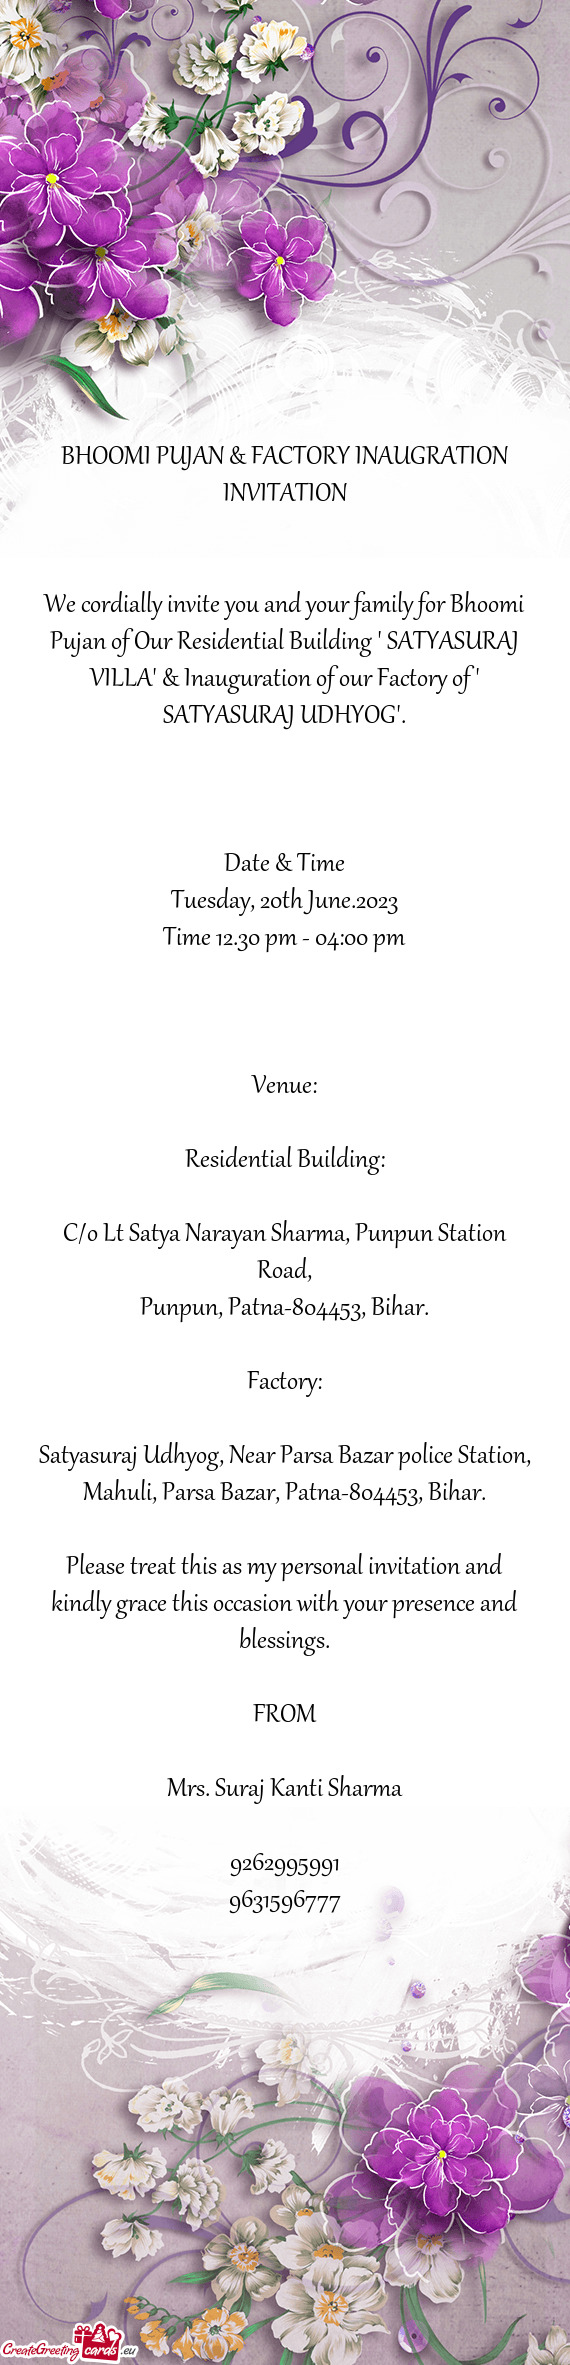 We cordially invite you and your family for Bhoomi Pujan of Our Residential Building " SATYASURAJ VI